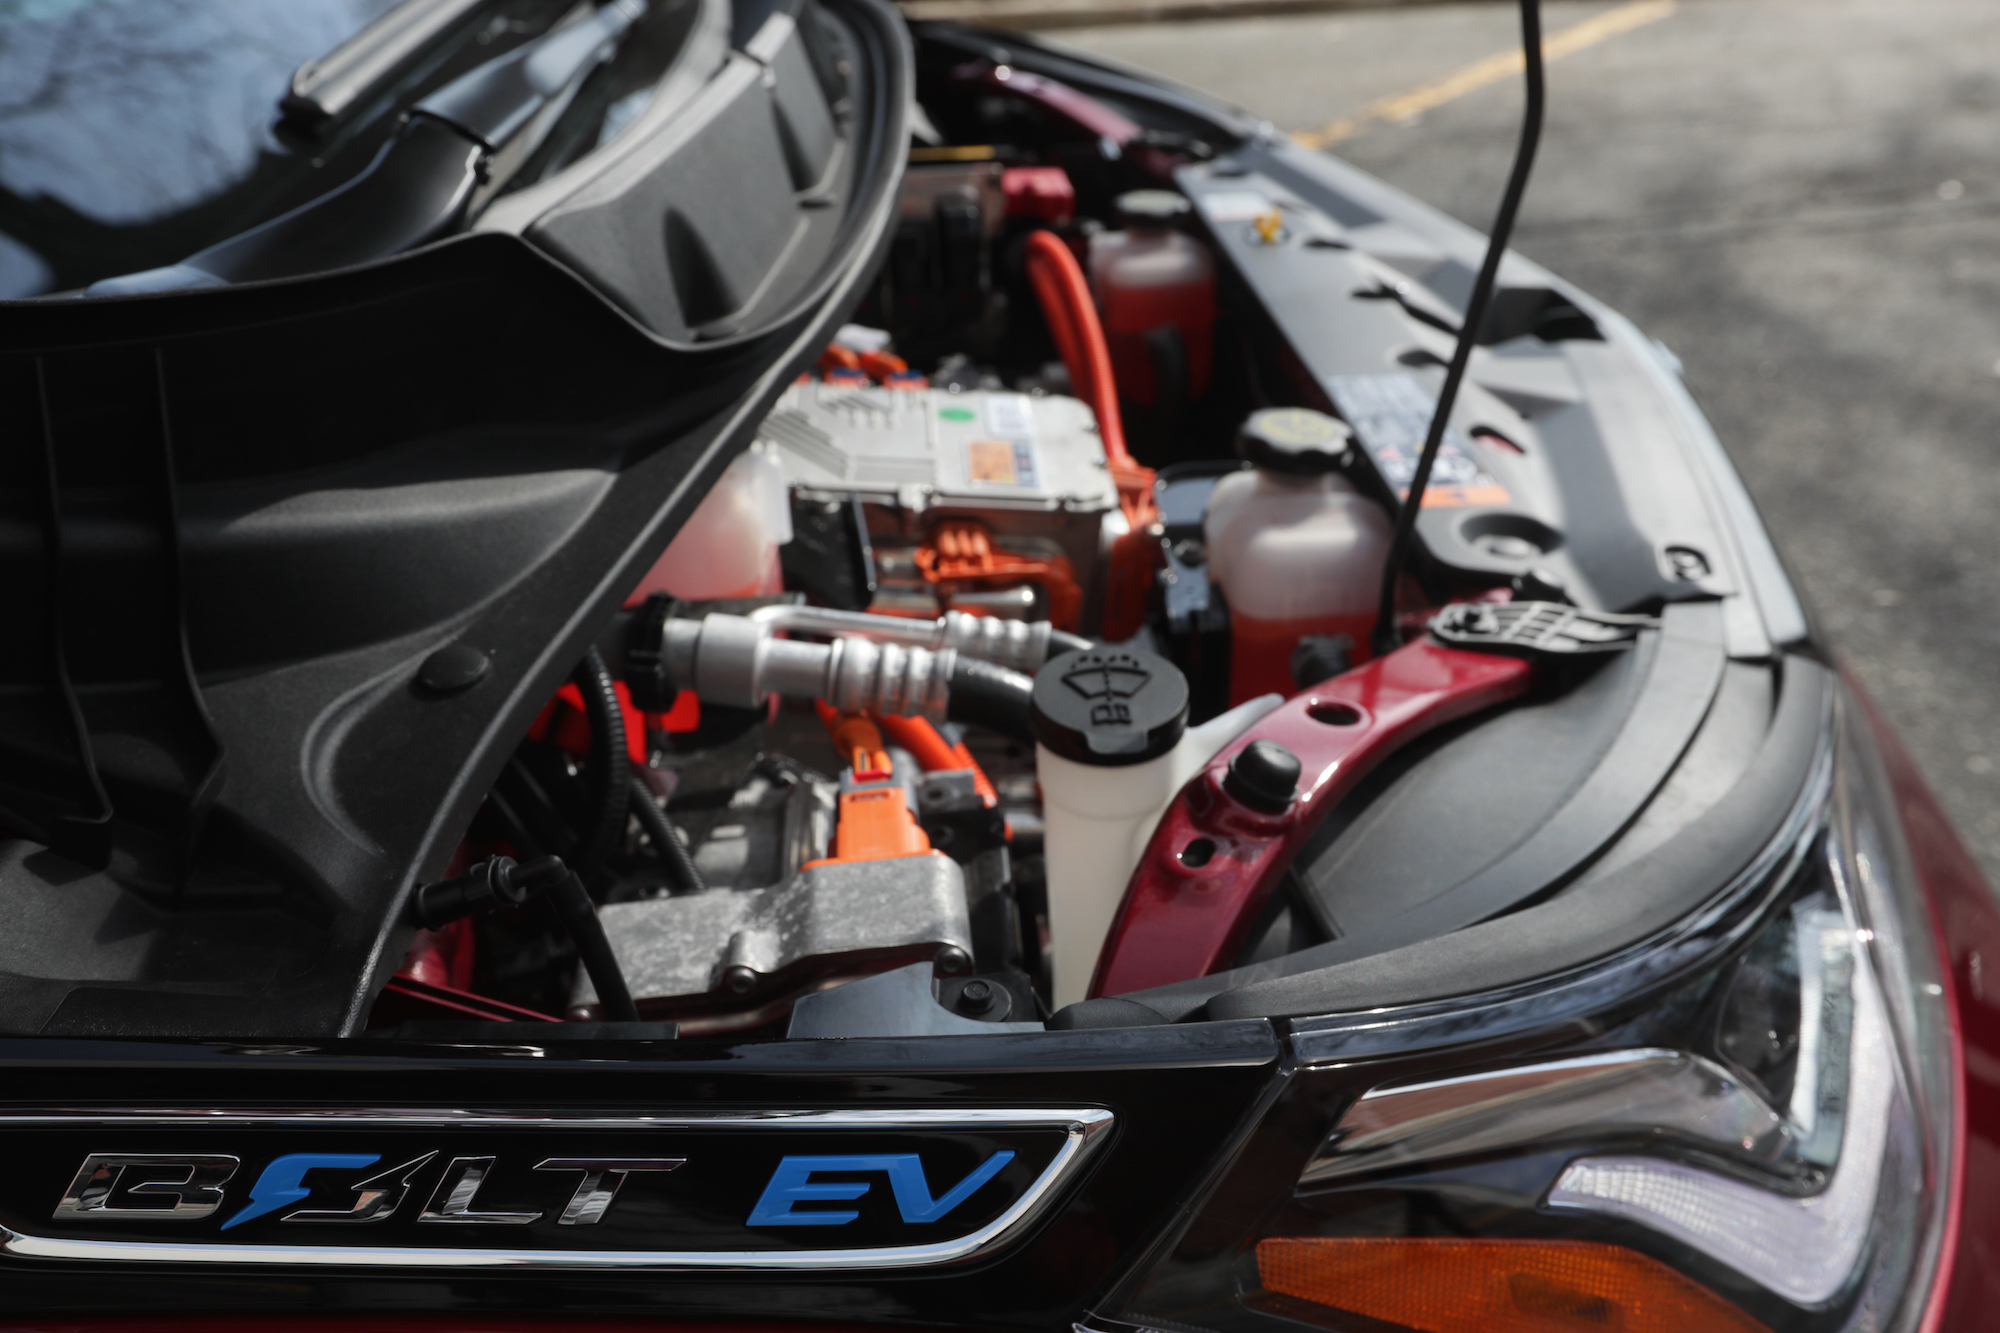 Under the hood of a Chevy Bolt EV in Boston on April 12, 2017